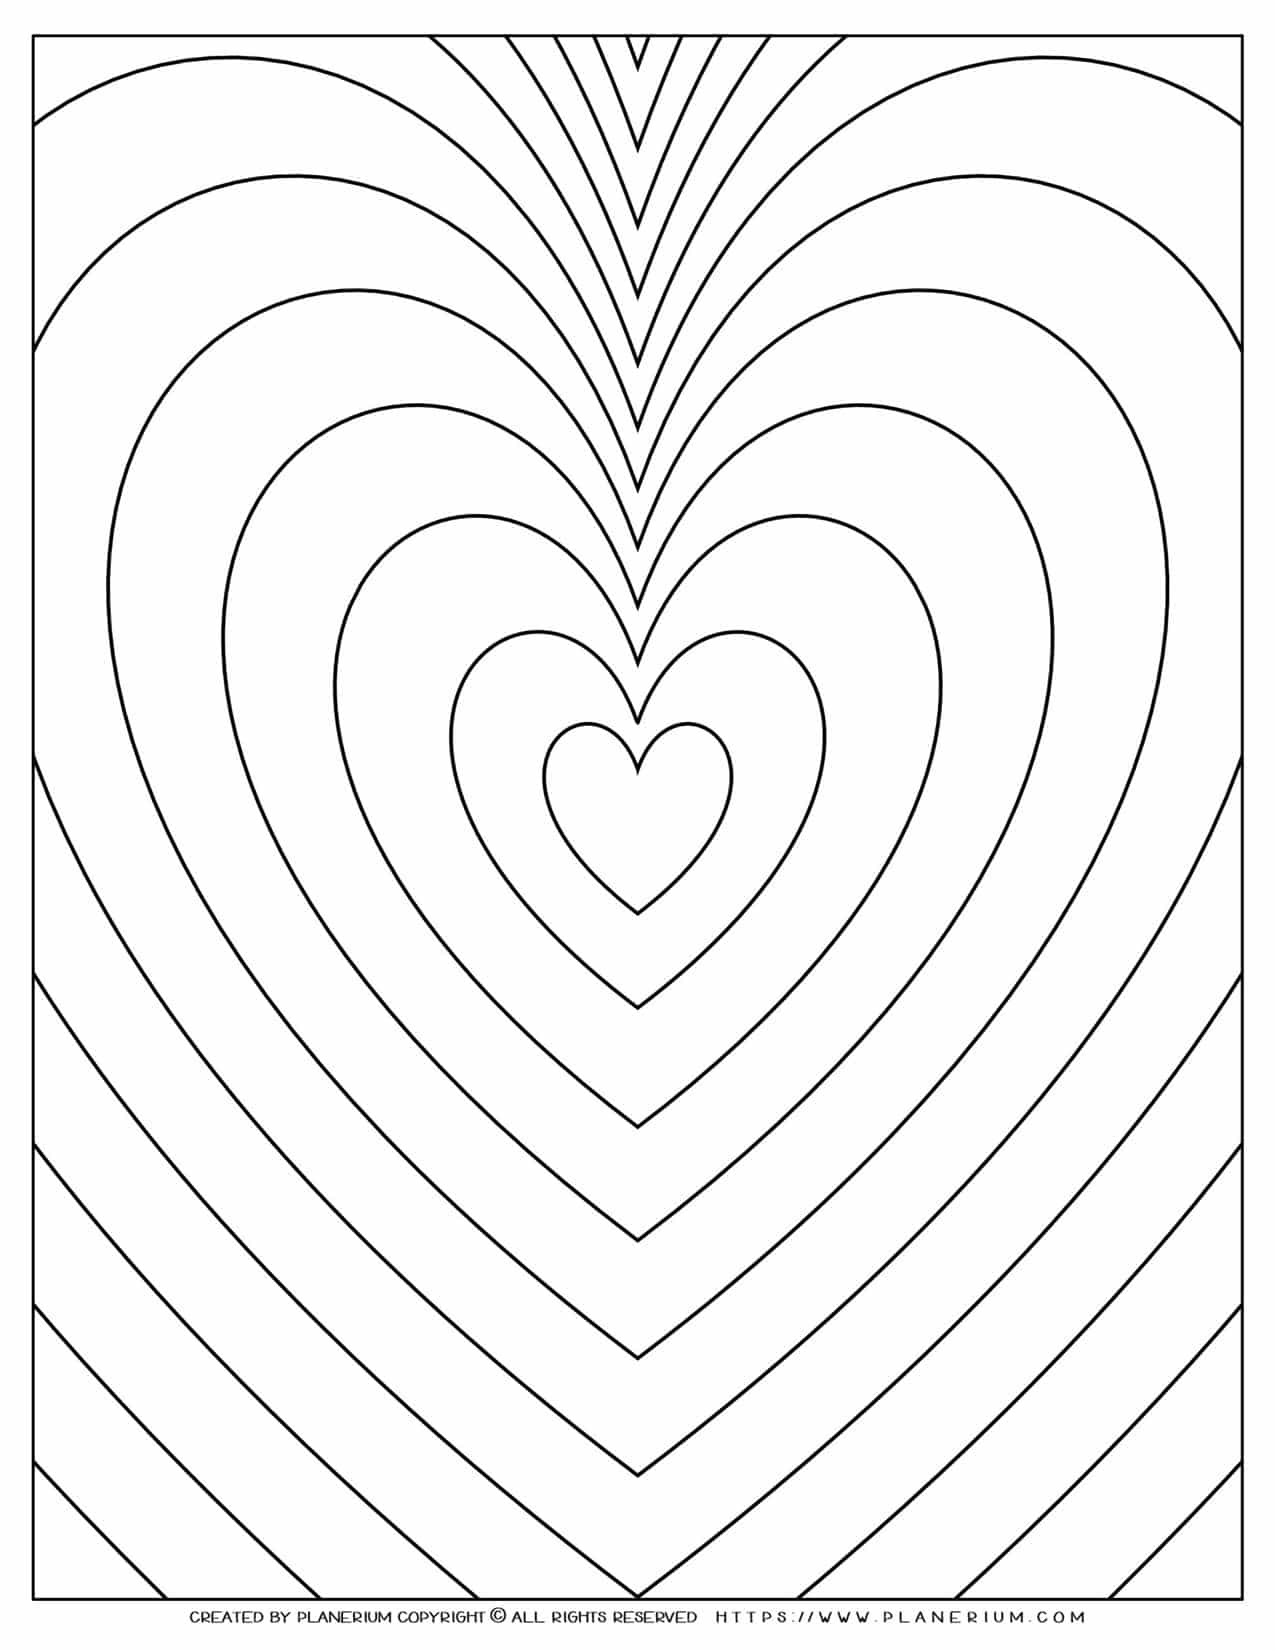 Adult Coloring Pages - Geometric Nested Hearts | Planerium